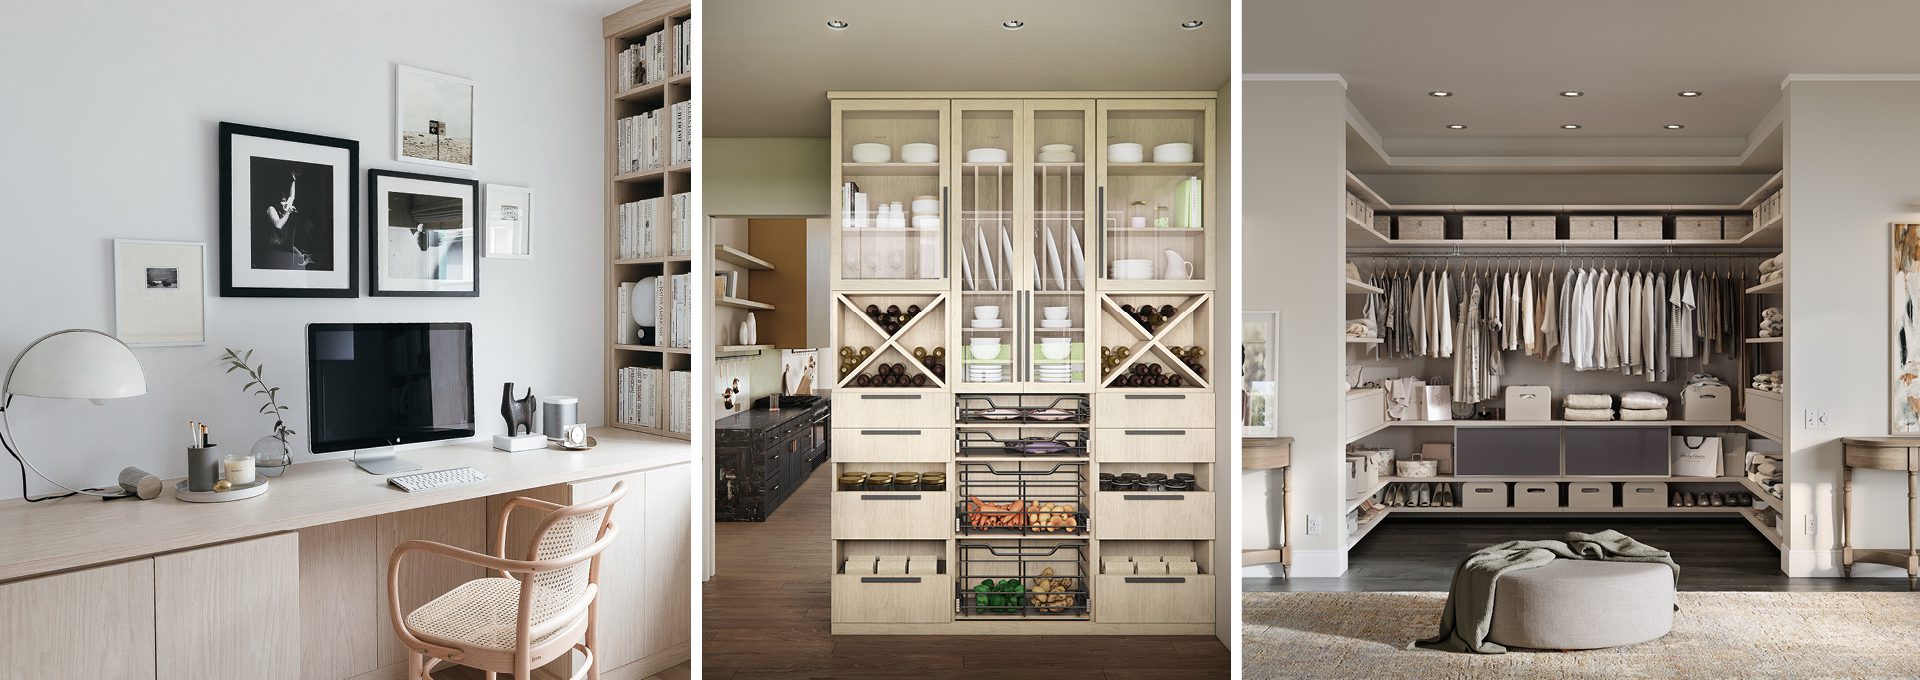 Enjoy the California Closets Spring Promotion Event with up to $2,500 savings for new walk in closet, media center, or kitchen pantry in San Diego.